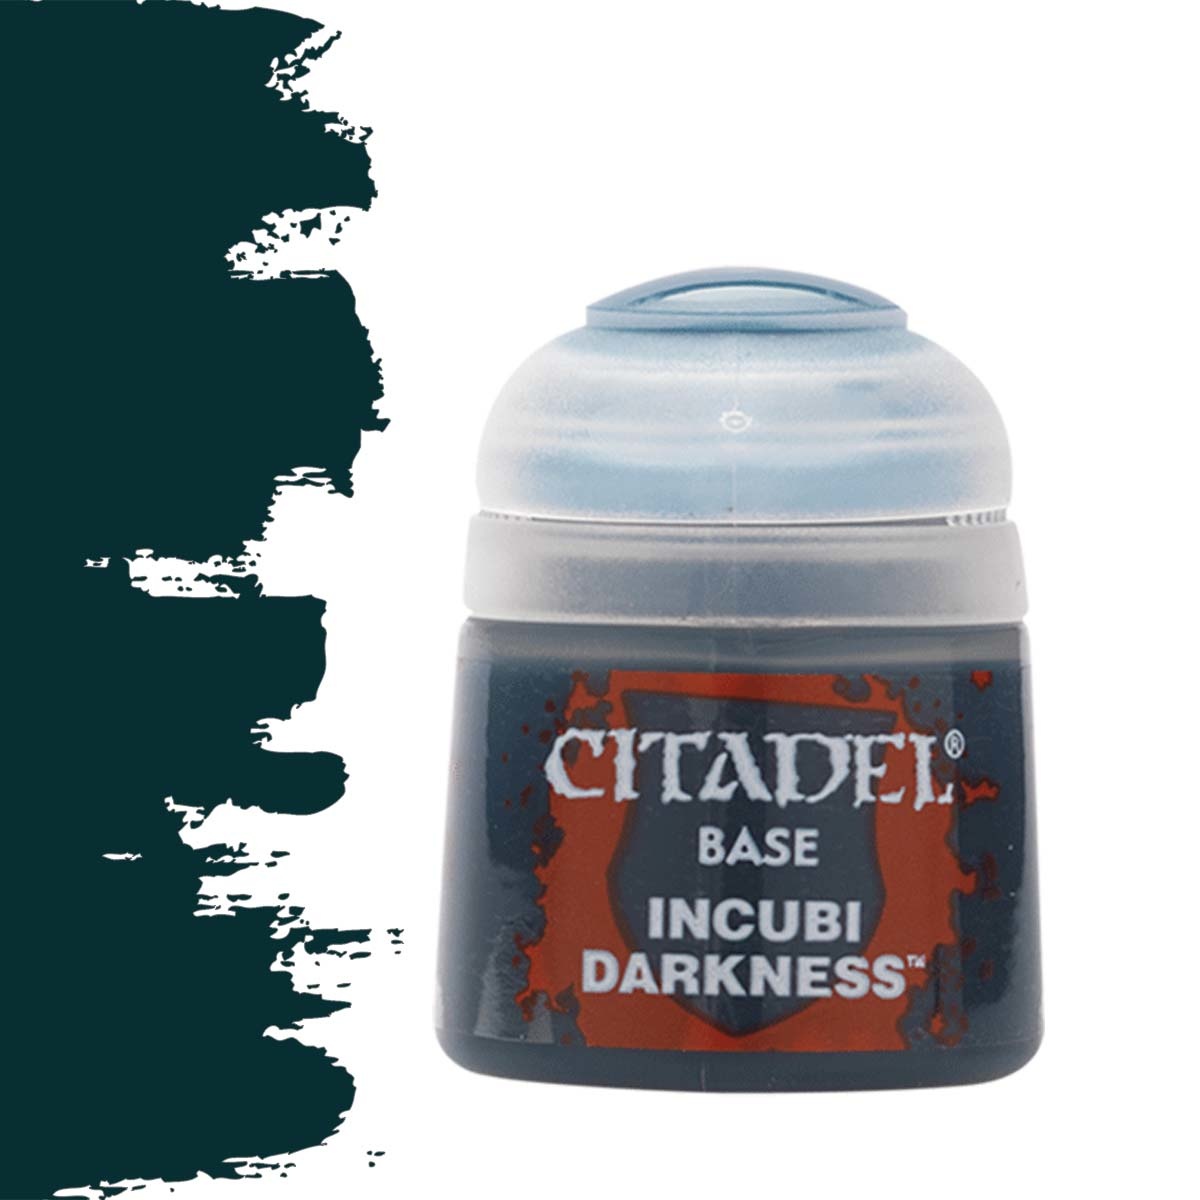 Citadel Incubi Darkness - Base Paint - 12ml - 21-11 - Buy now at ...